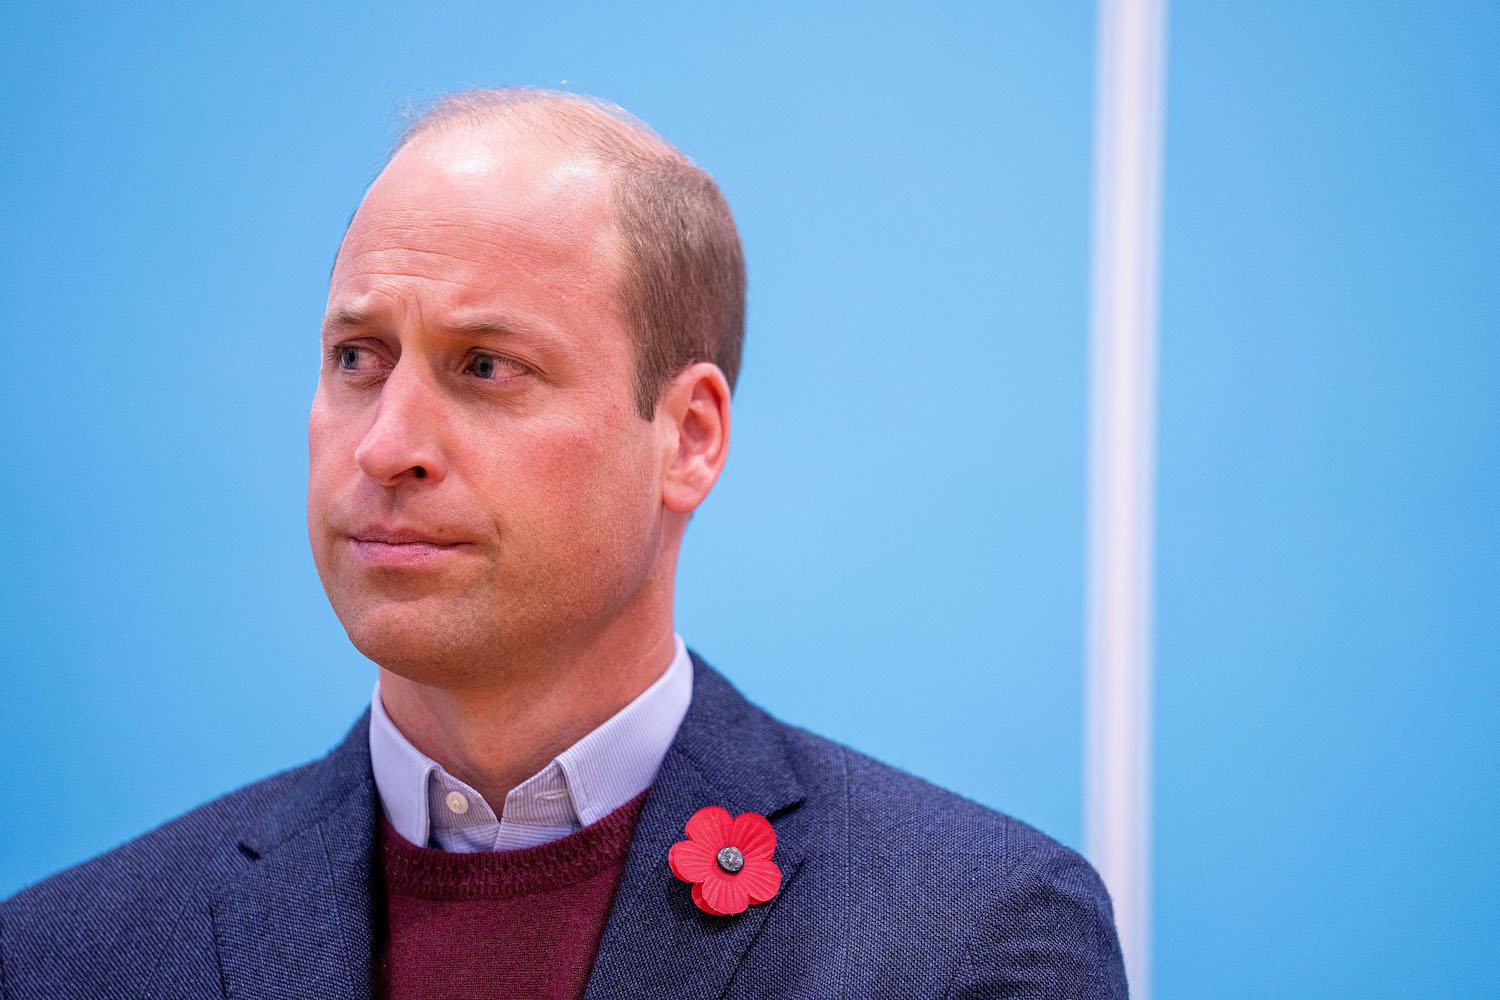 Prince William body language and expression appears serious